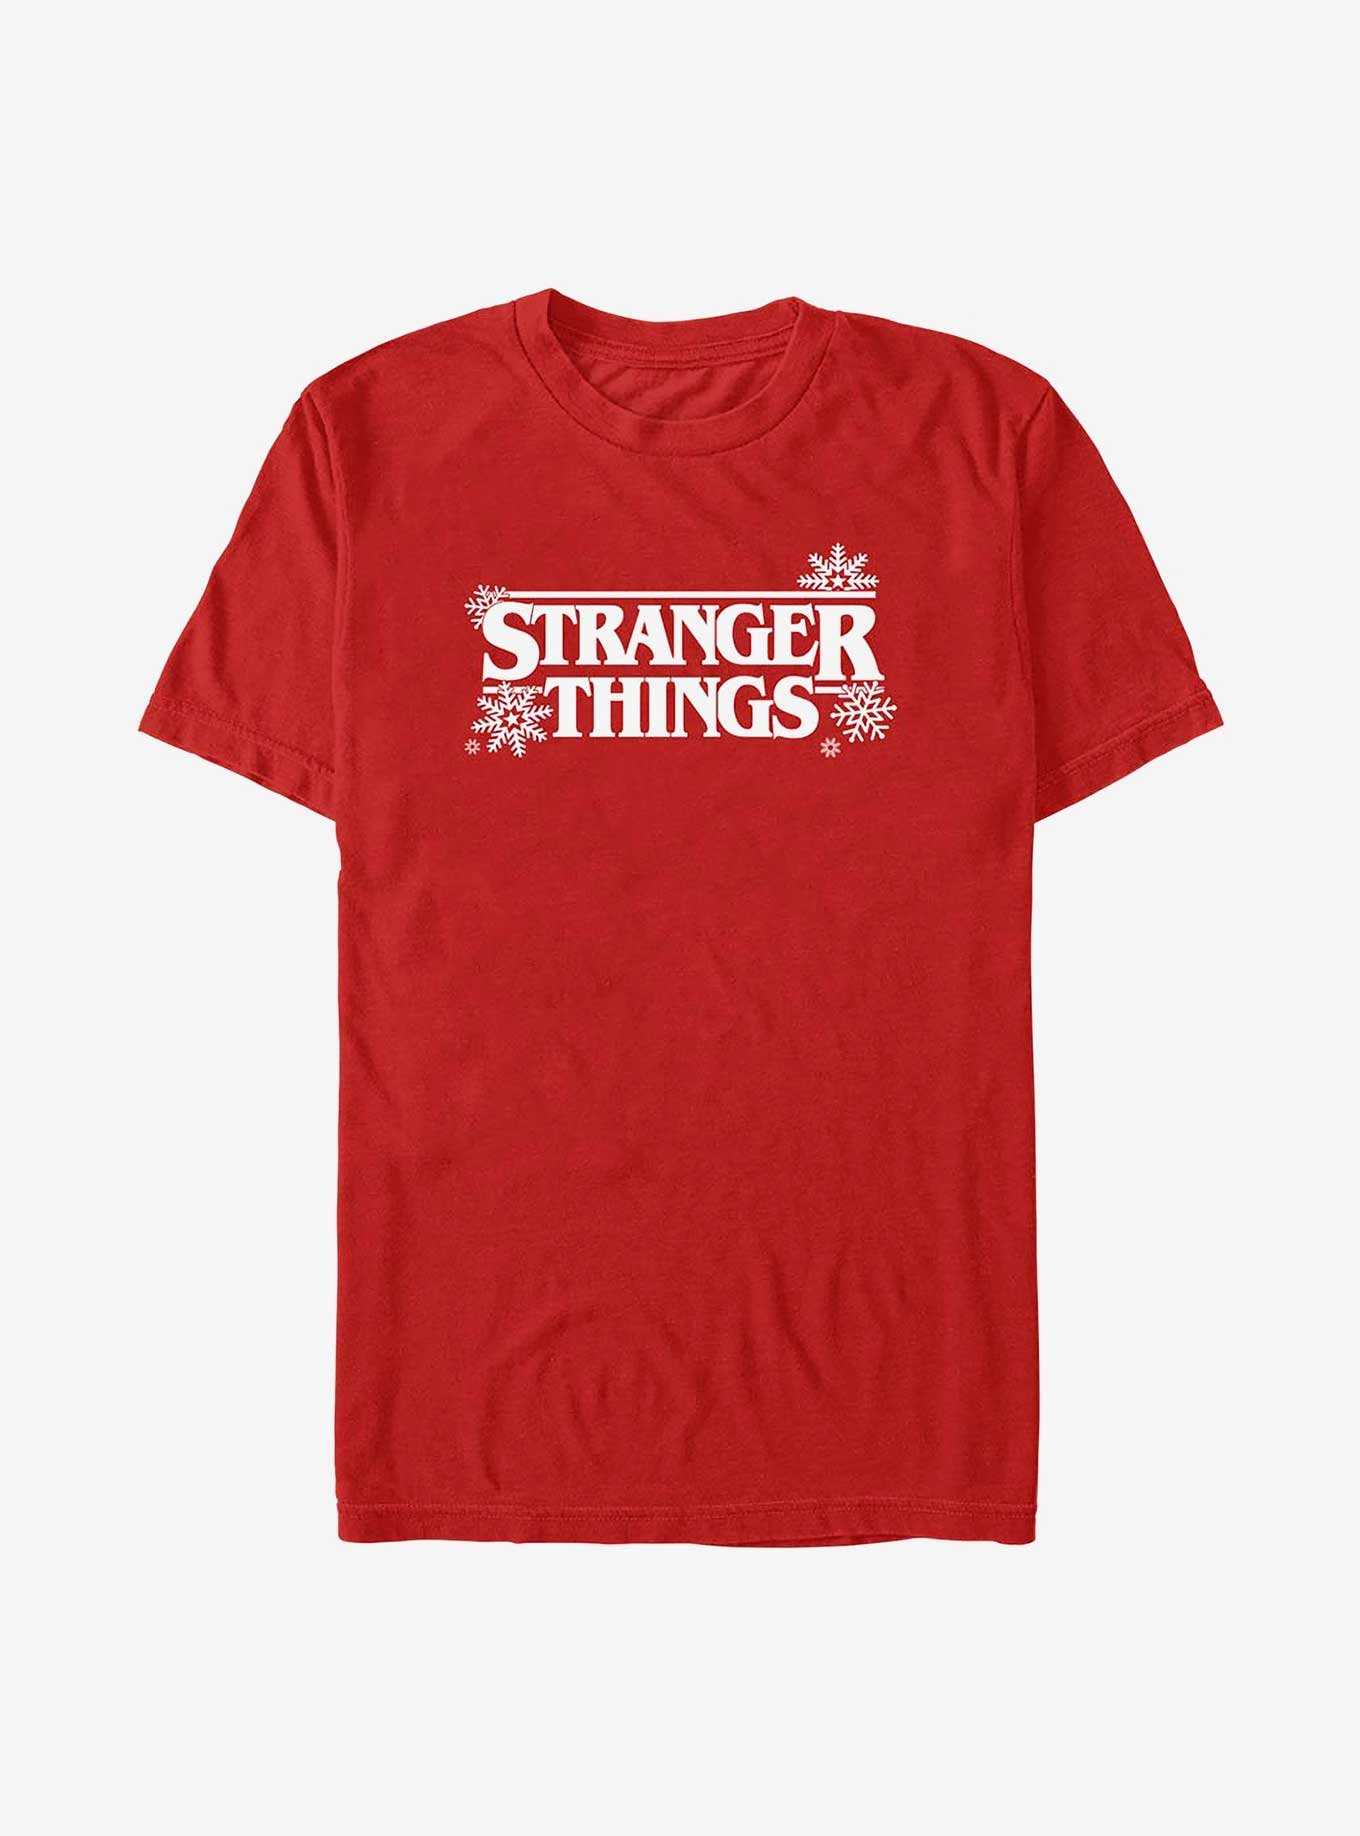 Stranger Things  Justice for Barb Essential T-Shirt for Sale by